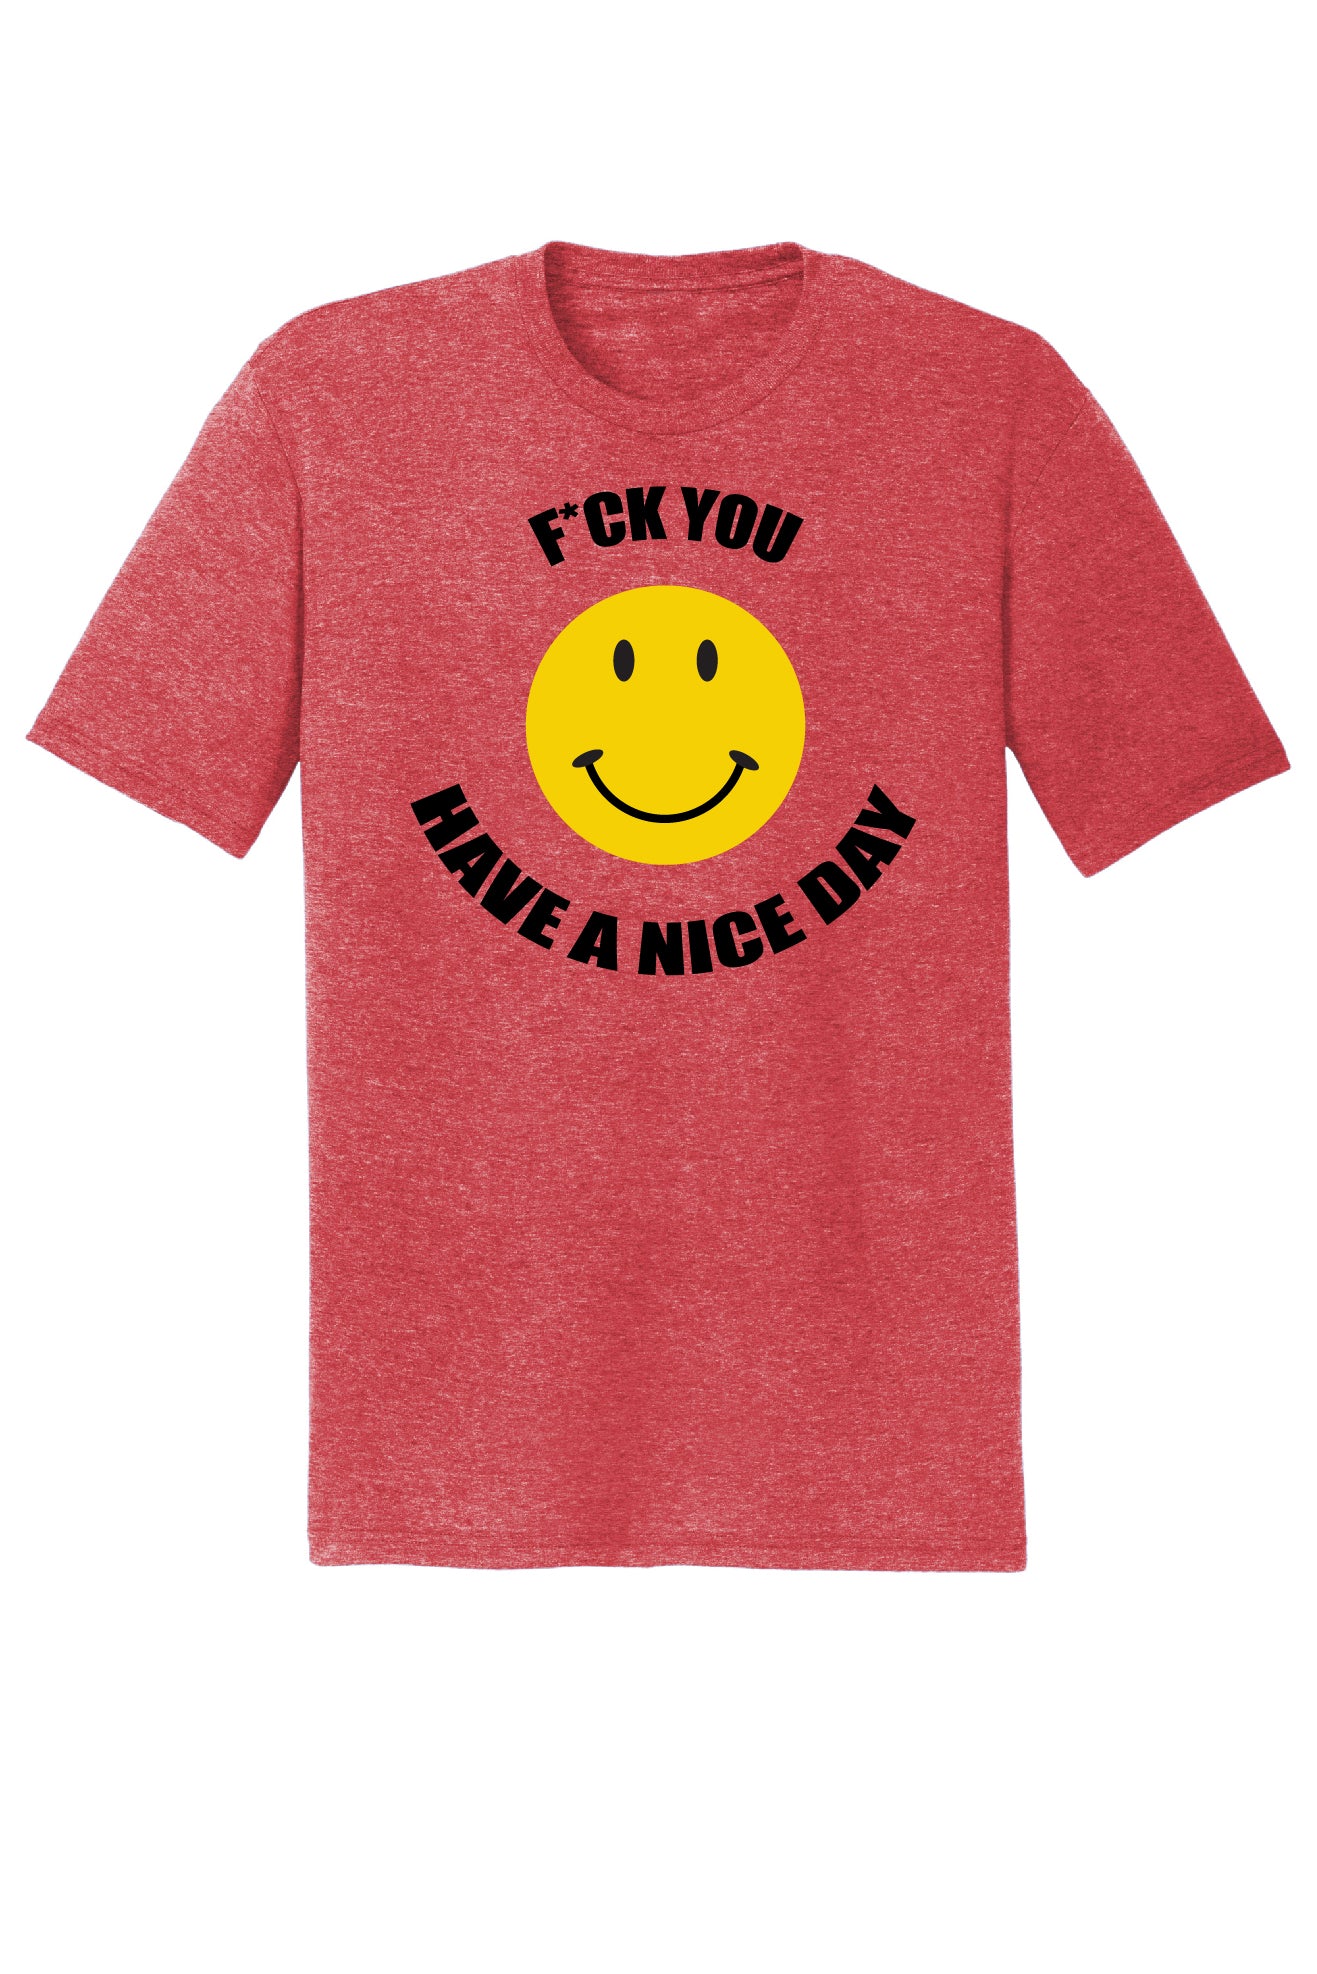 F*CK YOU, Have a Nice Day, Smiley Face Tee